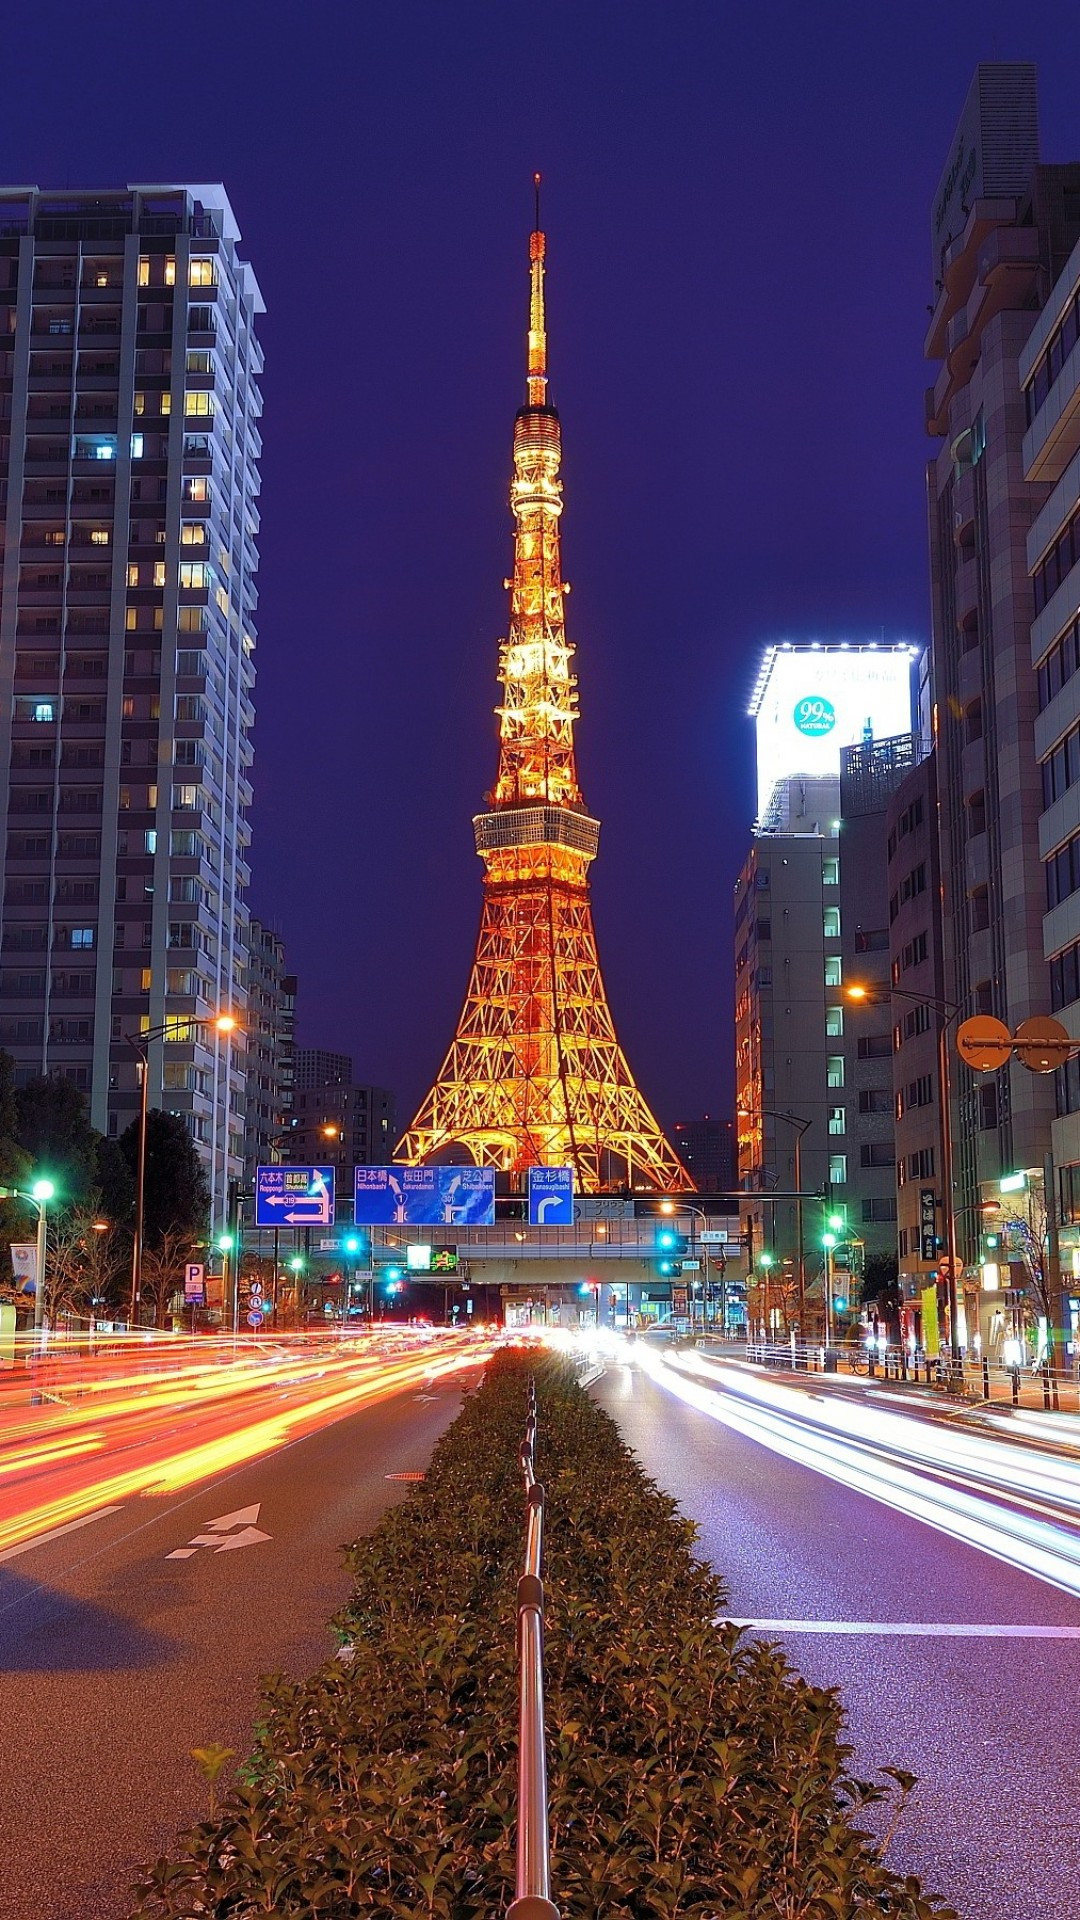 Download 1080x1920 Japan, Tokyo Tower, Time Lapse, Road, Night, Buildings, Urban Wallpaper For IPhone IPhone 7 Plus, IPhone 6+, Sony Xperia Z, HTC One